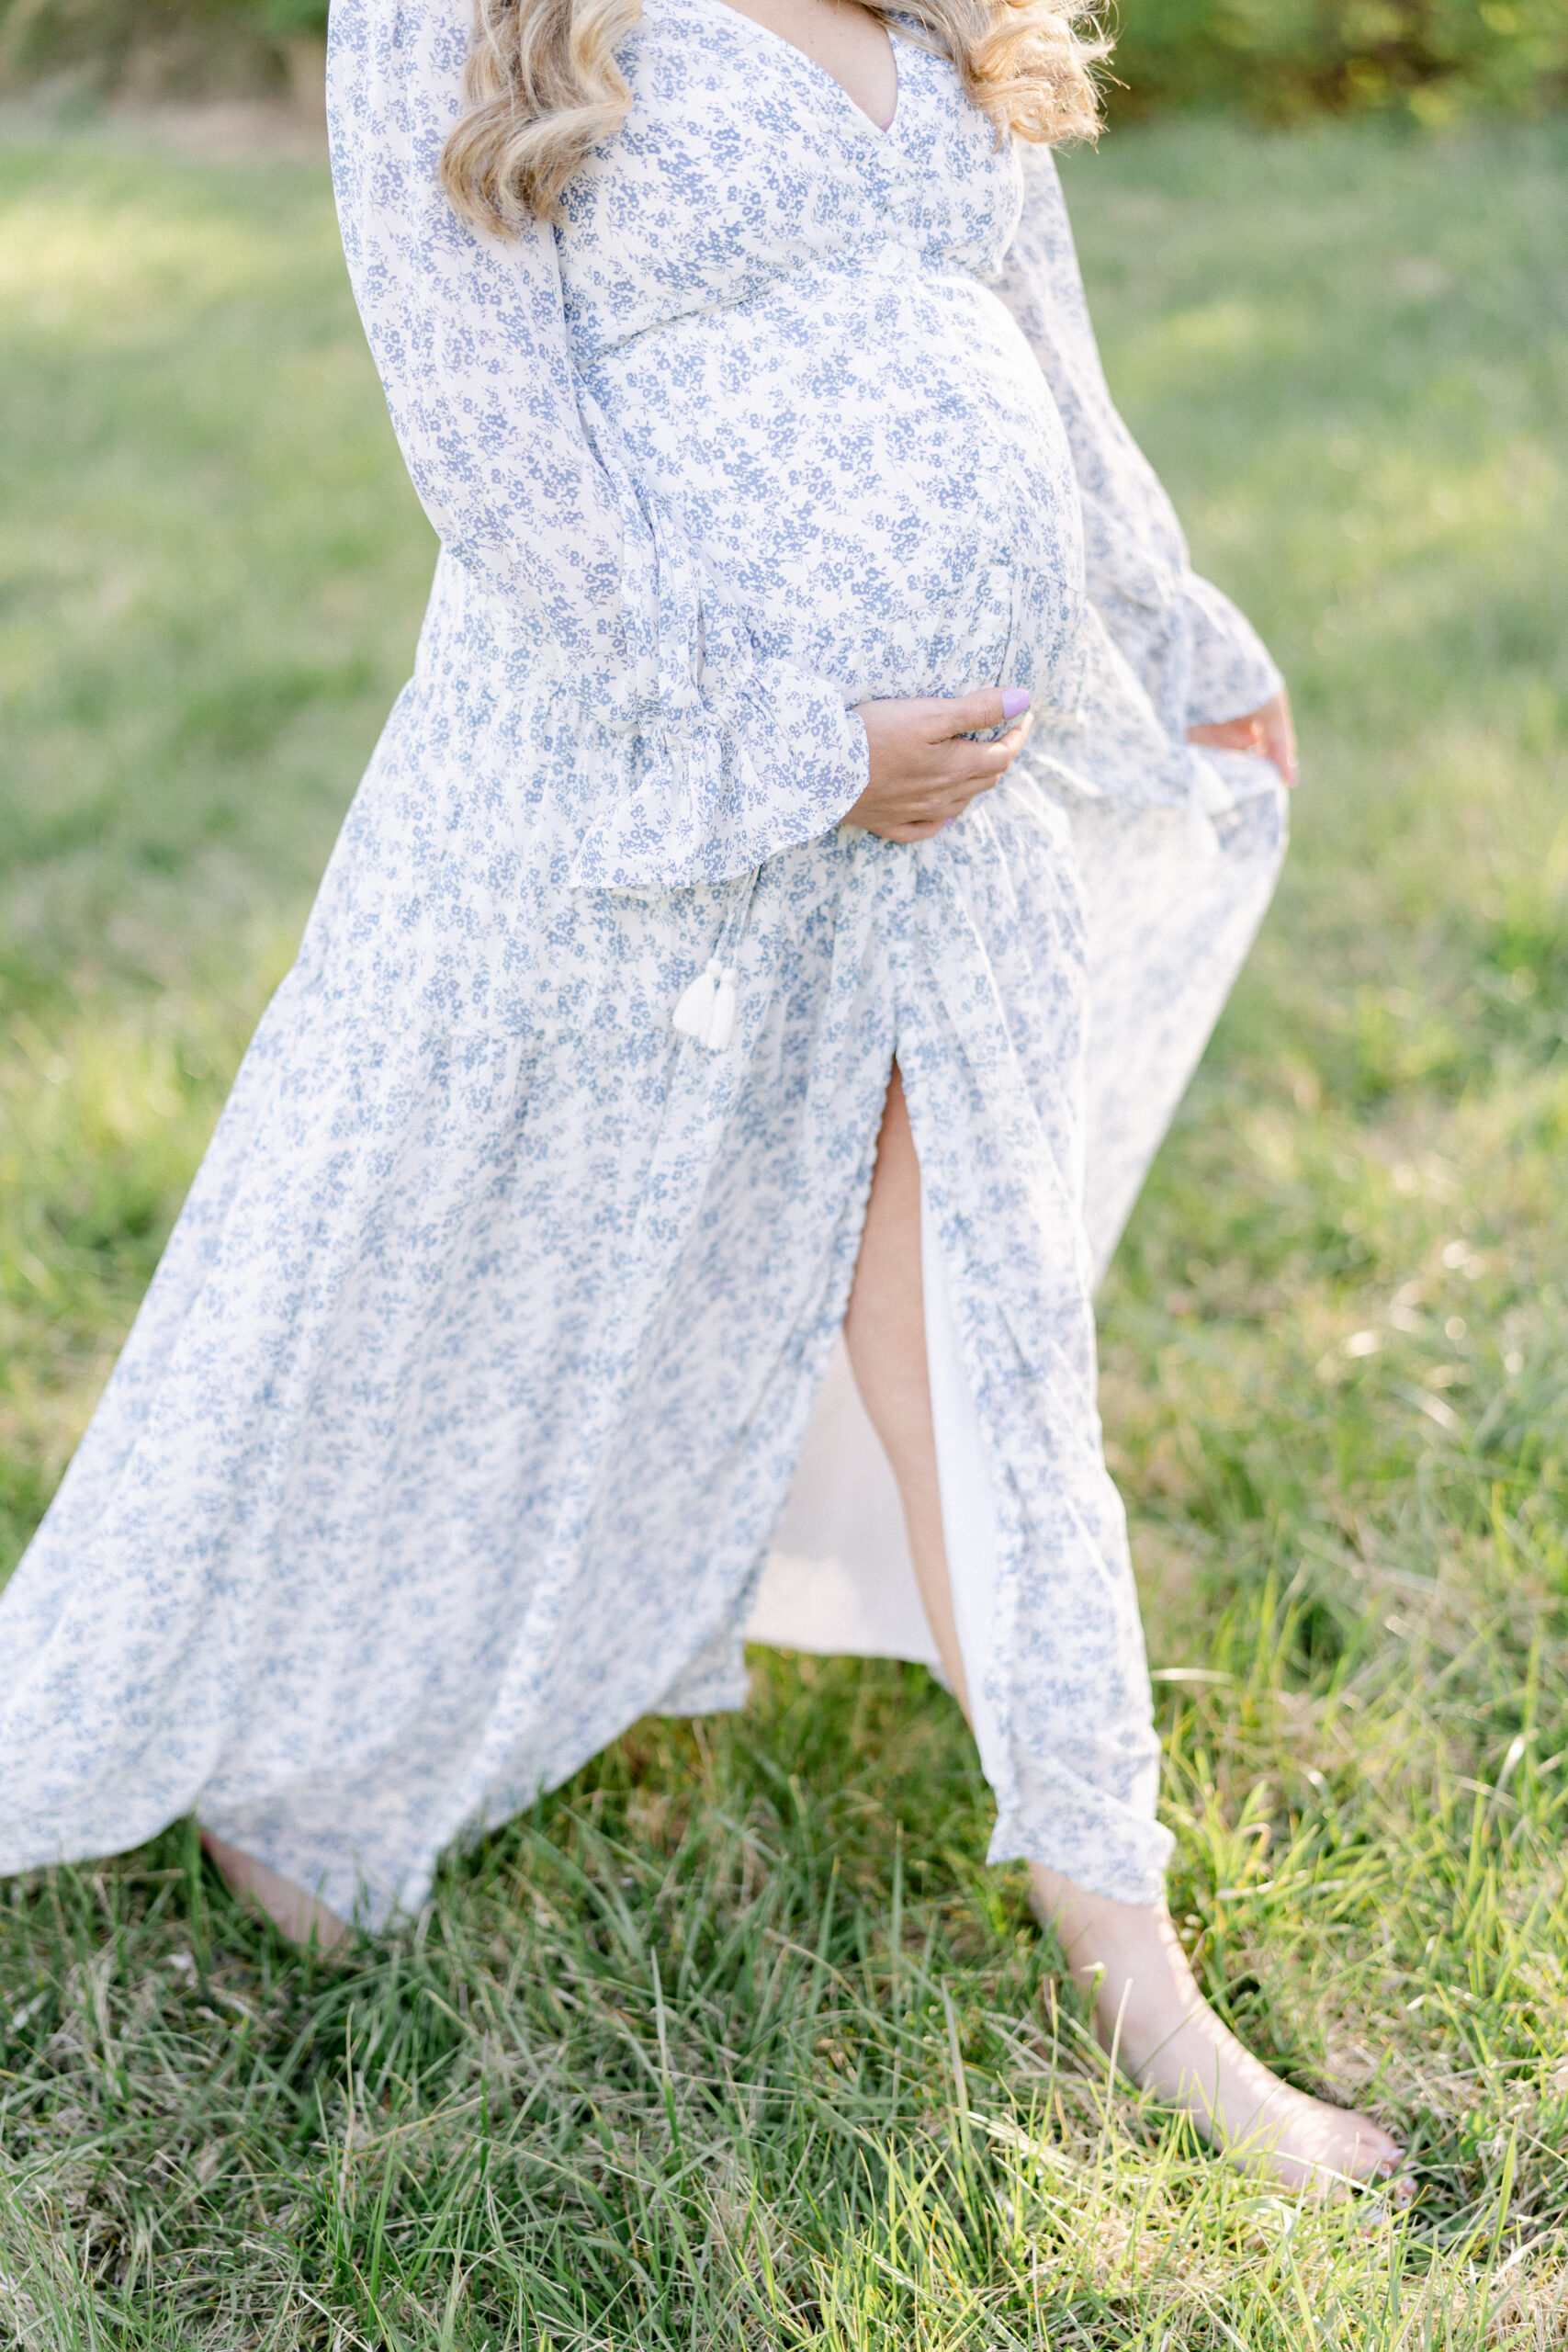 Brentwood TN Maternity Session | Backman Family | Grace Paul Photography